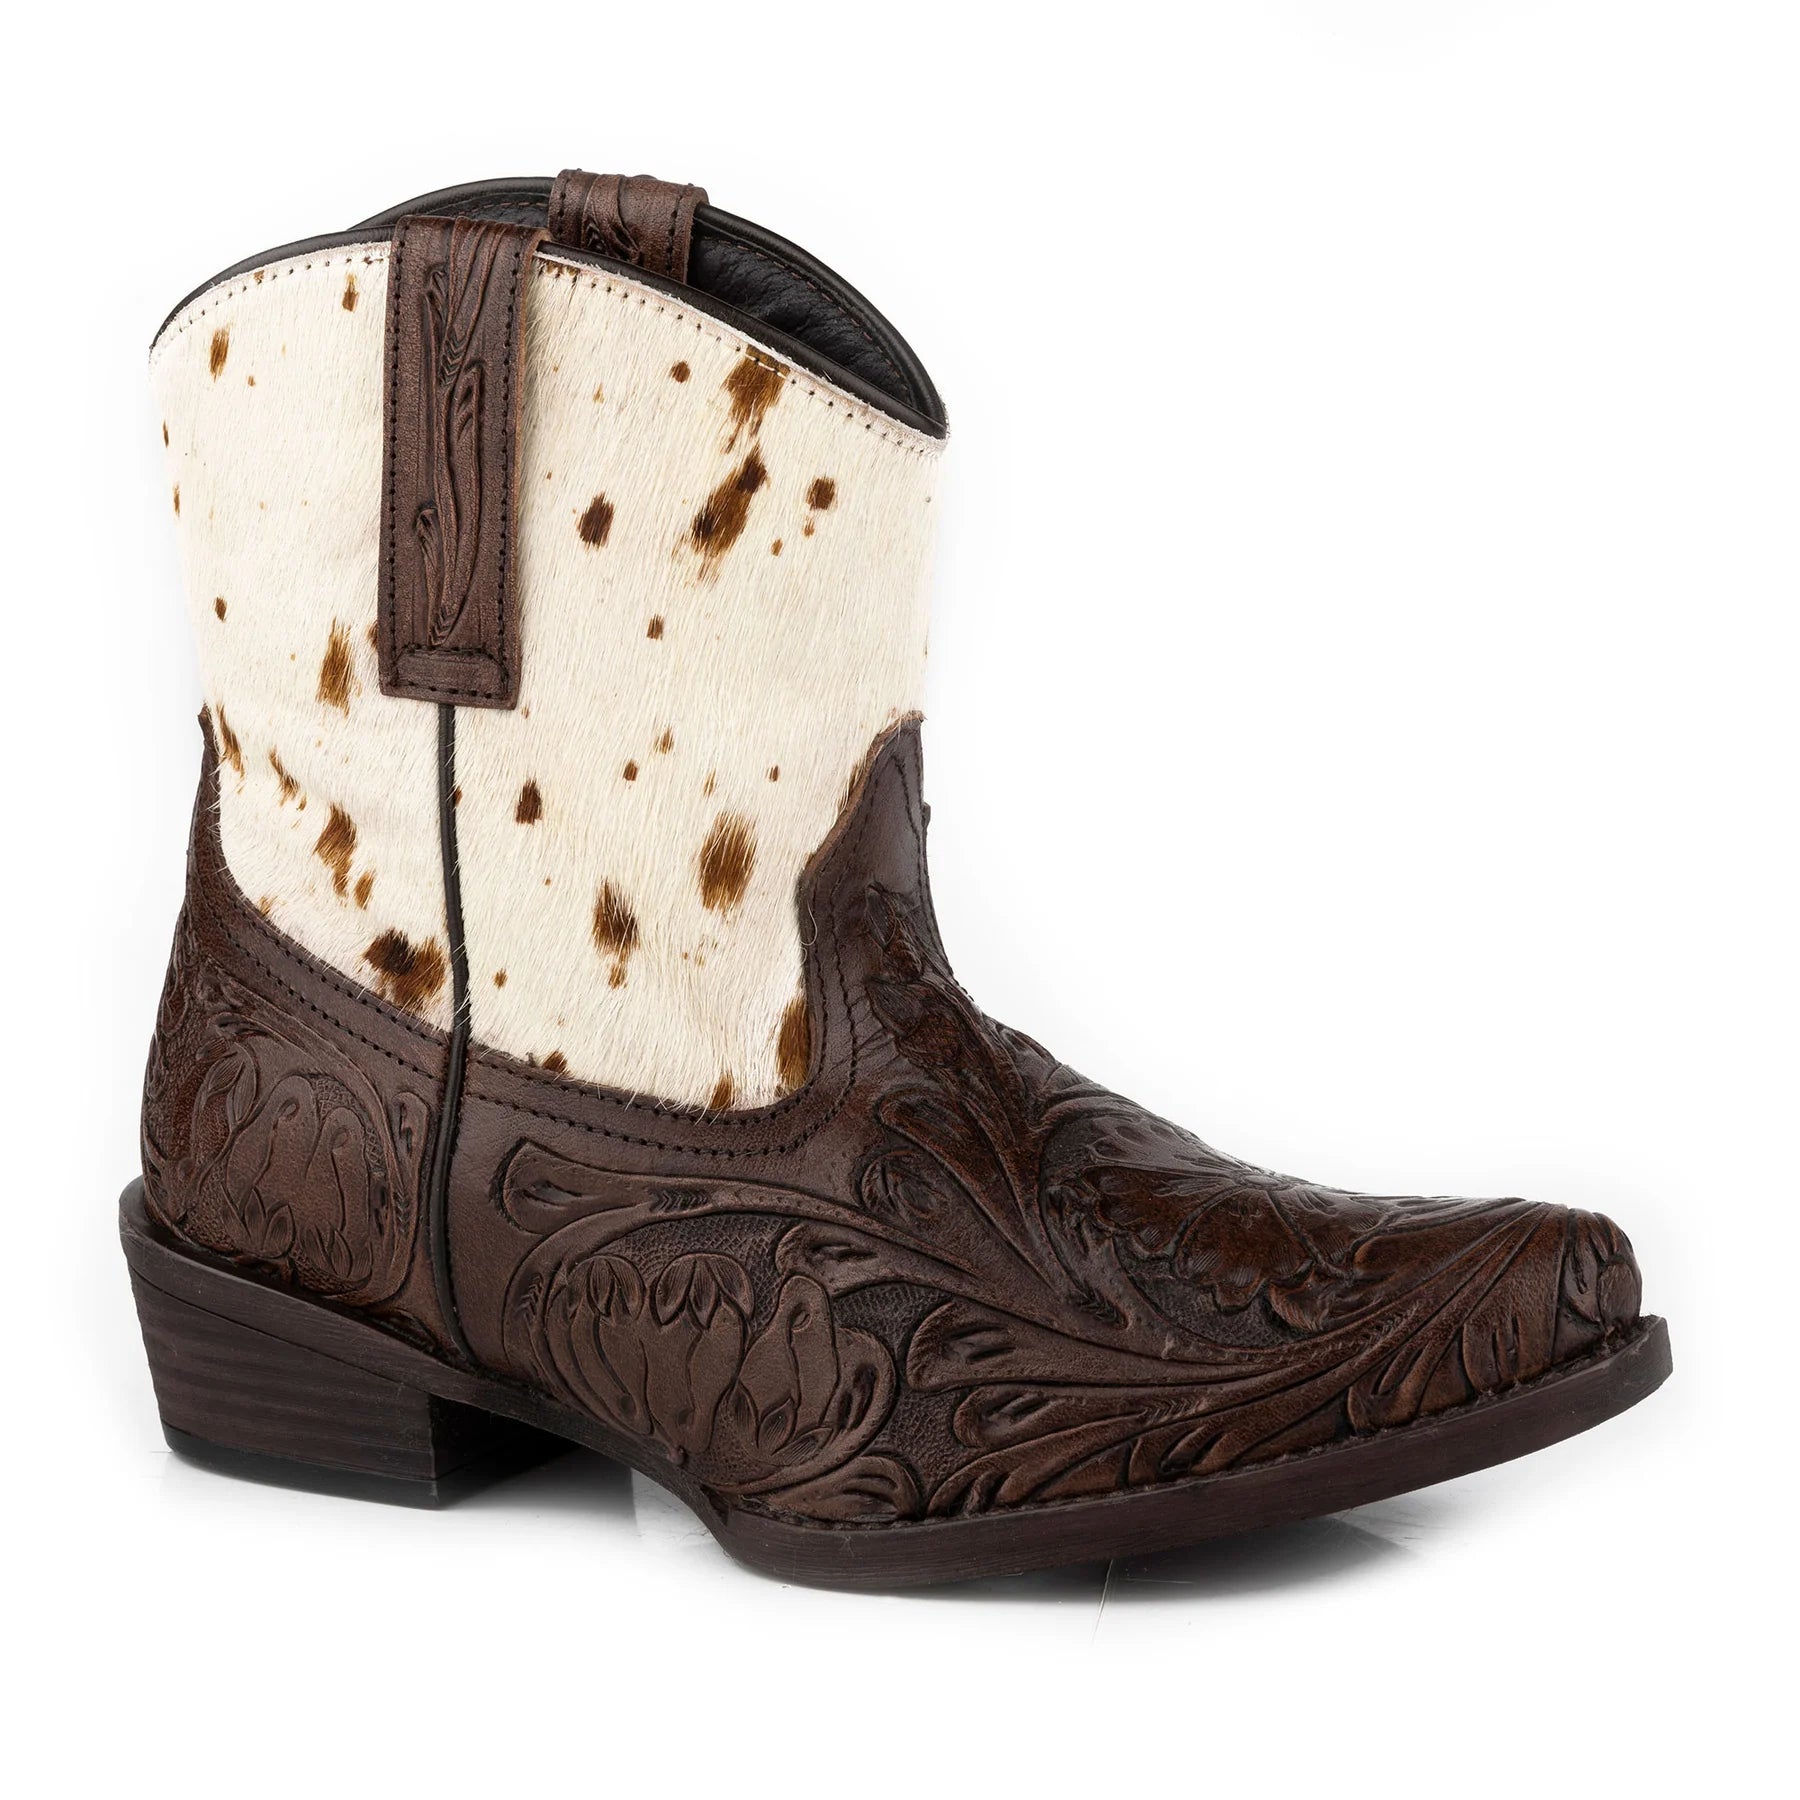 Roper Wms Dusty Tooled Brown Leather/Hair On - Mothers Day Sale